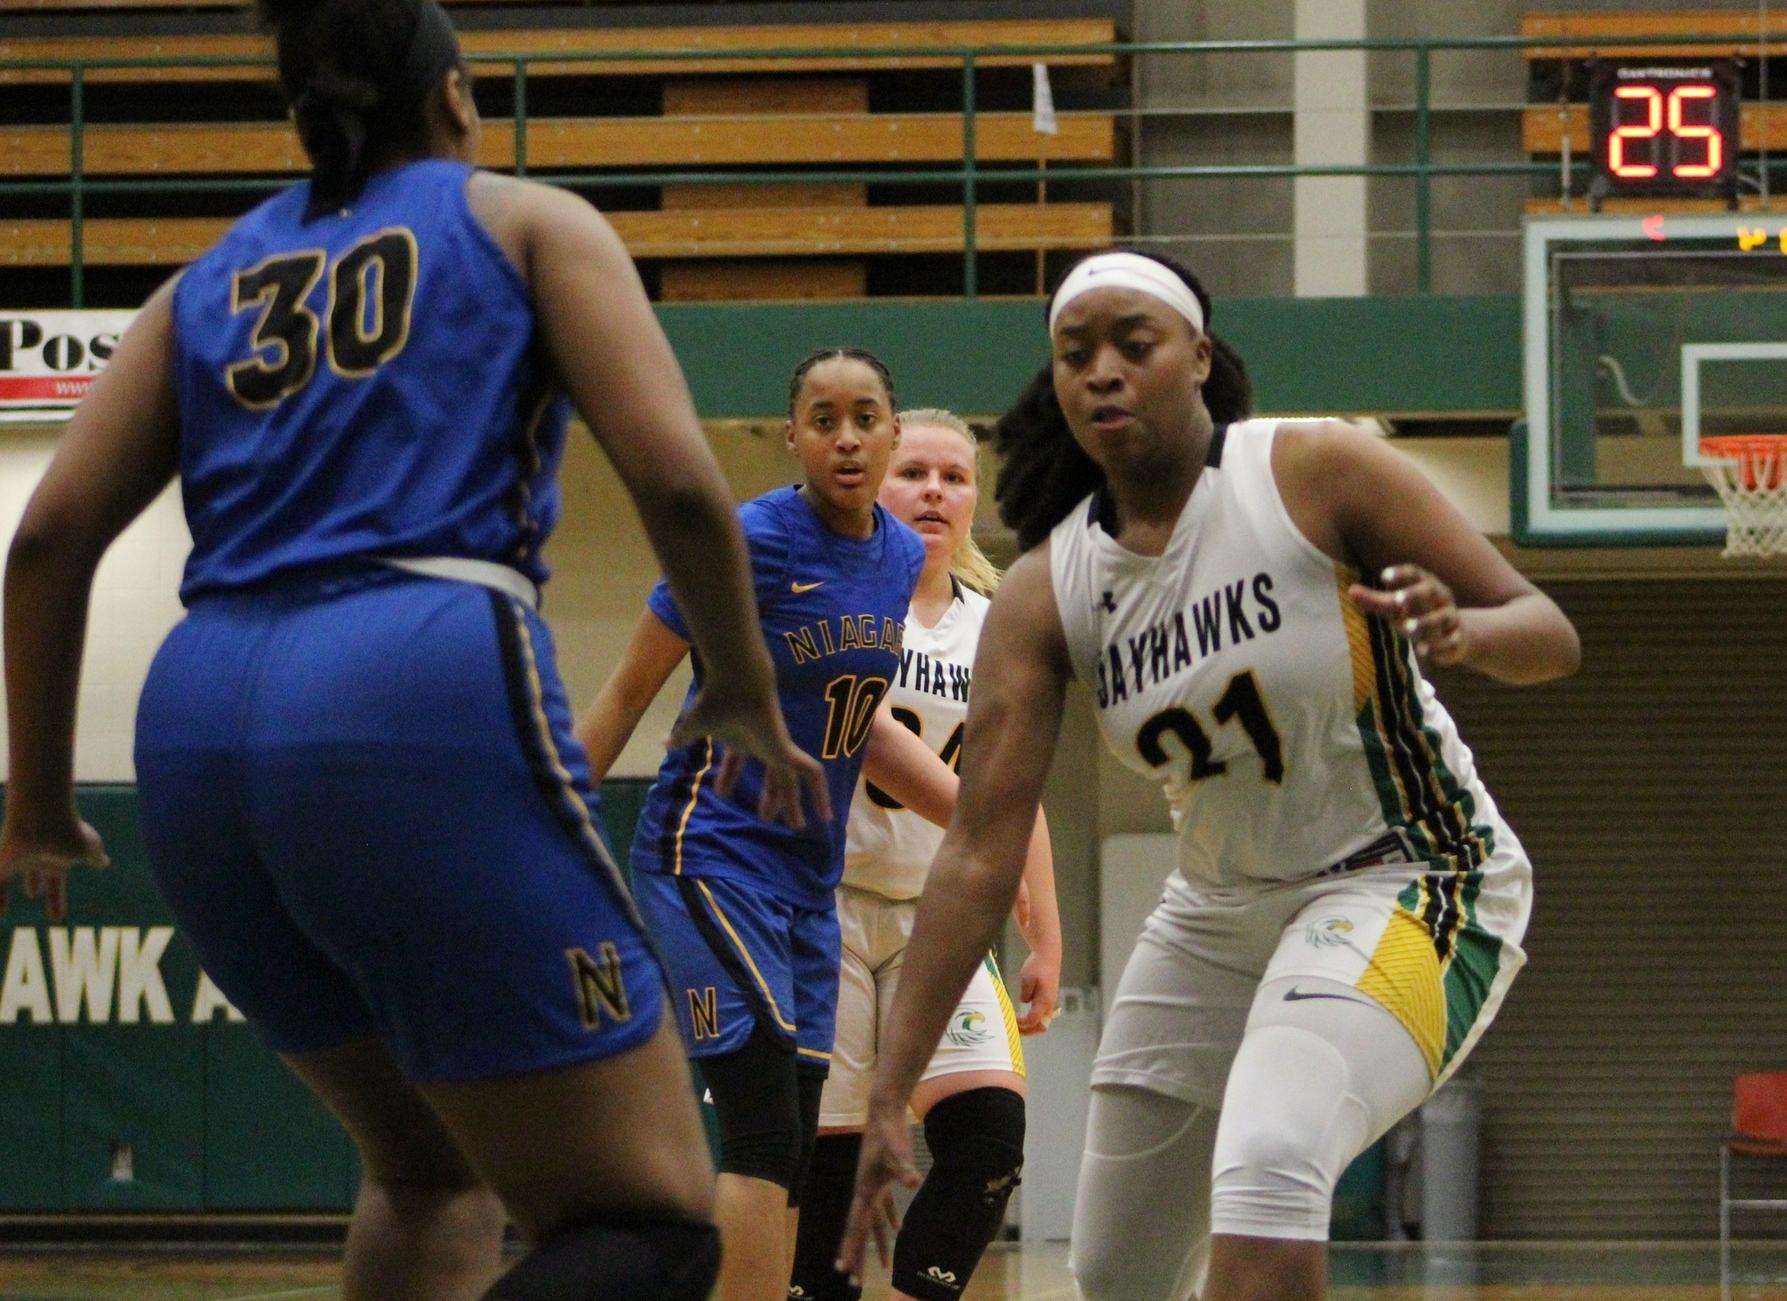 Hicks Scores Career-High 33 points; Jayhawks Fall to NCCC at Home